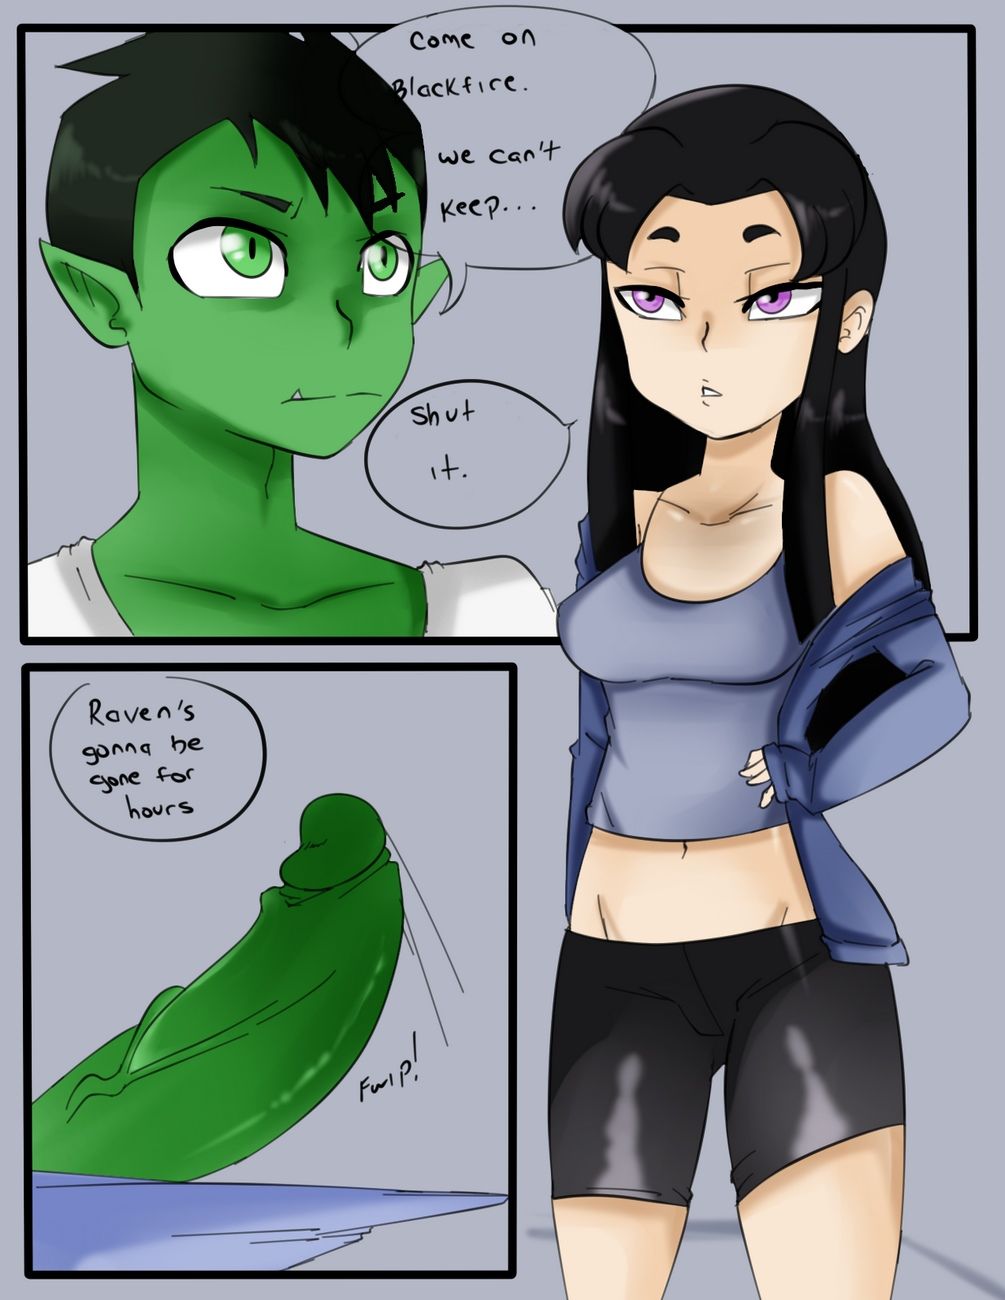 Alone With Blackfire page 2